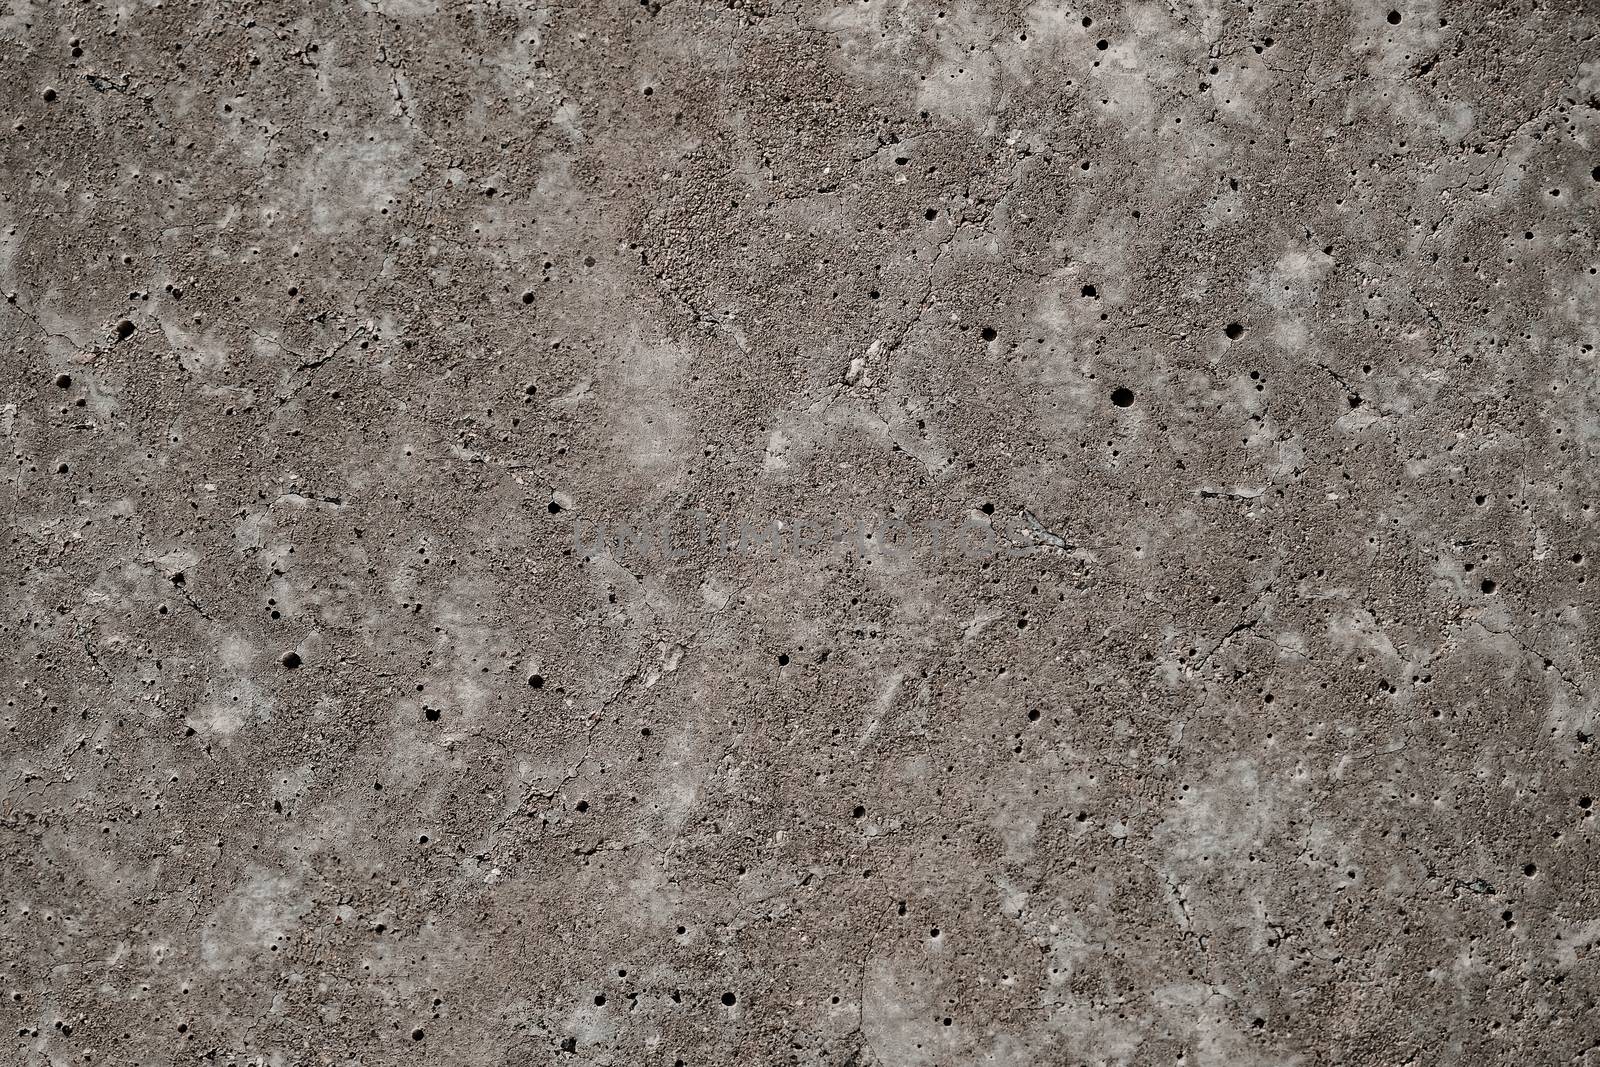 Texture of the Cement Concrete. Dark Grungy Background. Wall and Flooring for Industry Loft Design